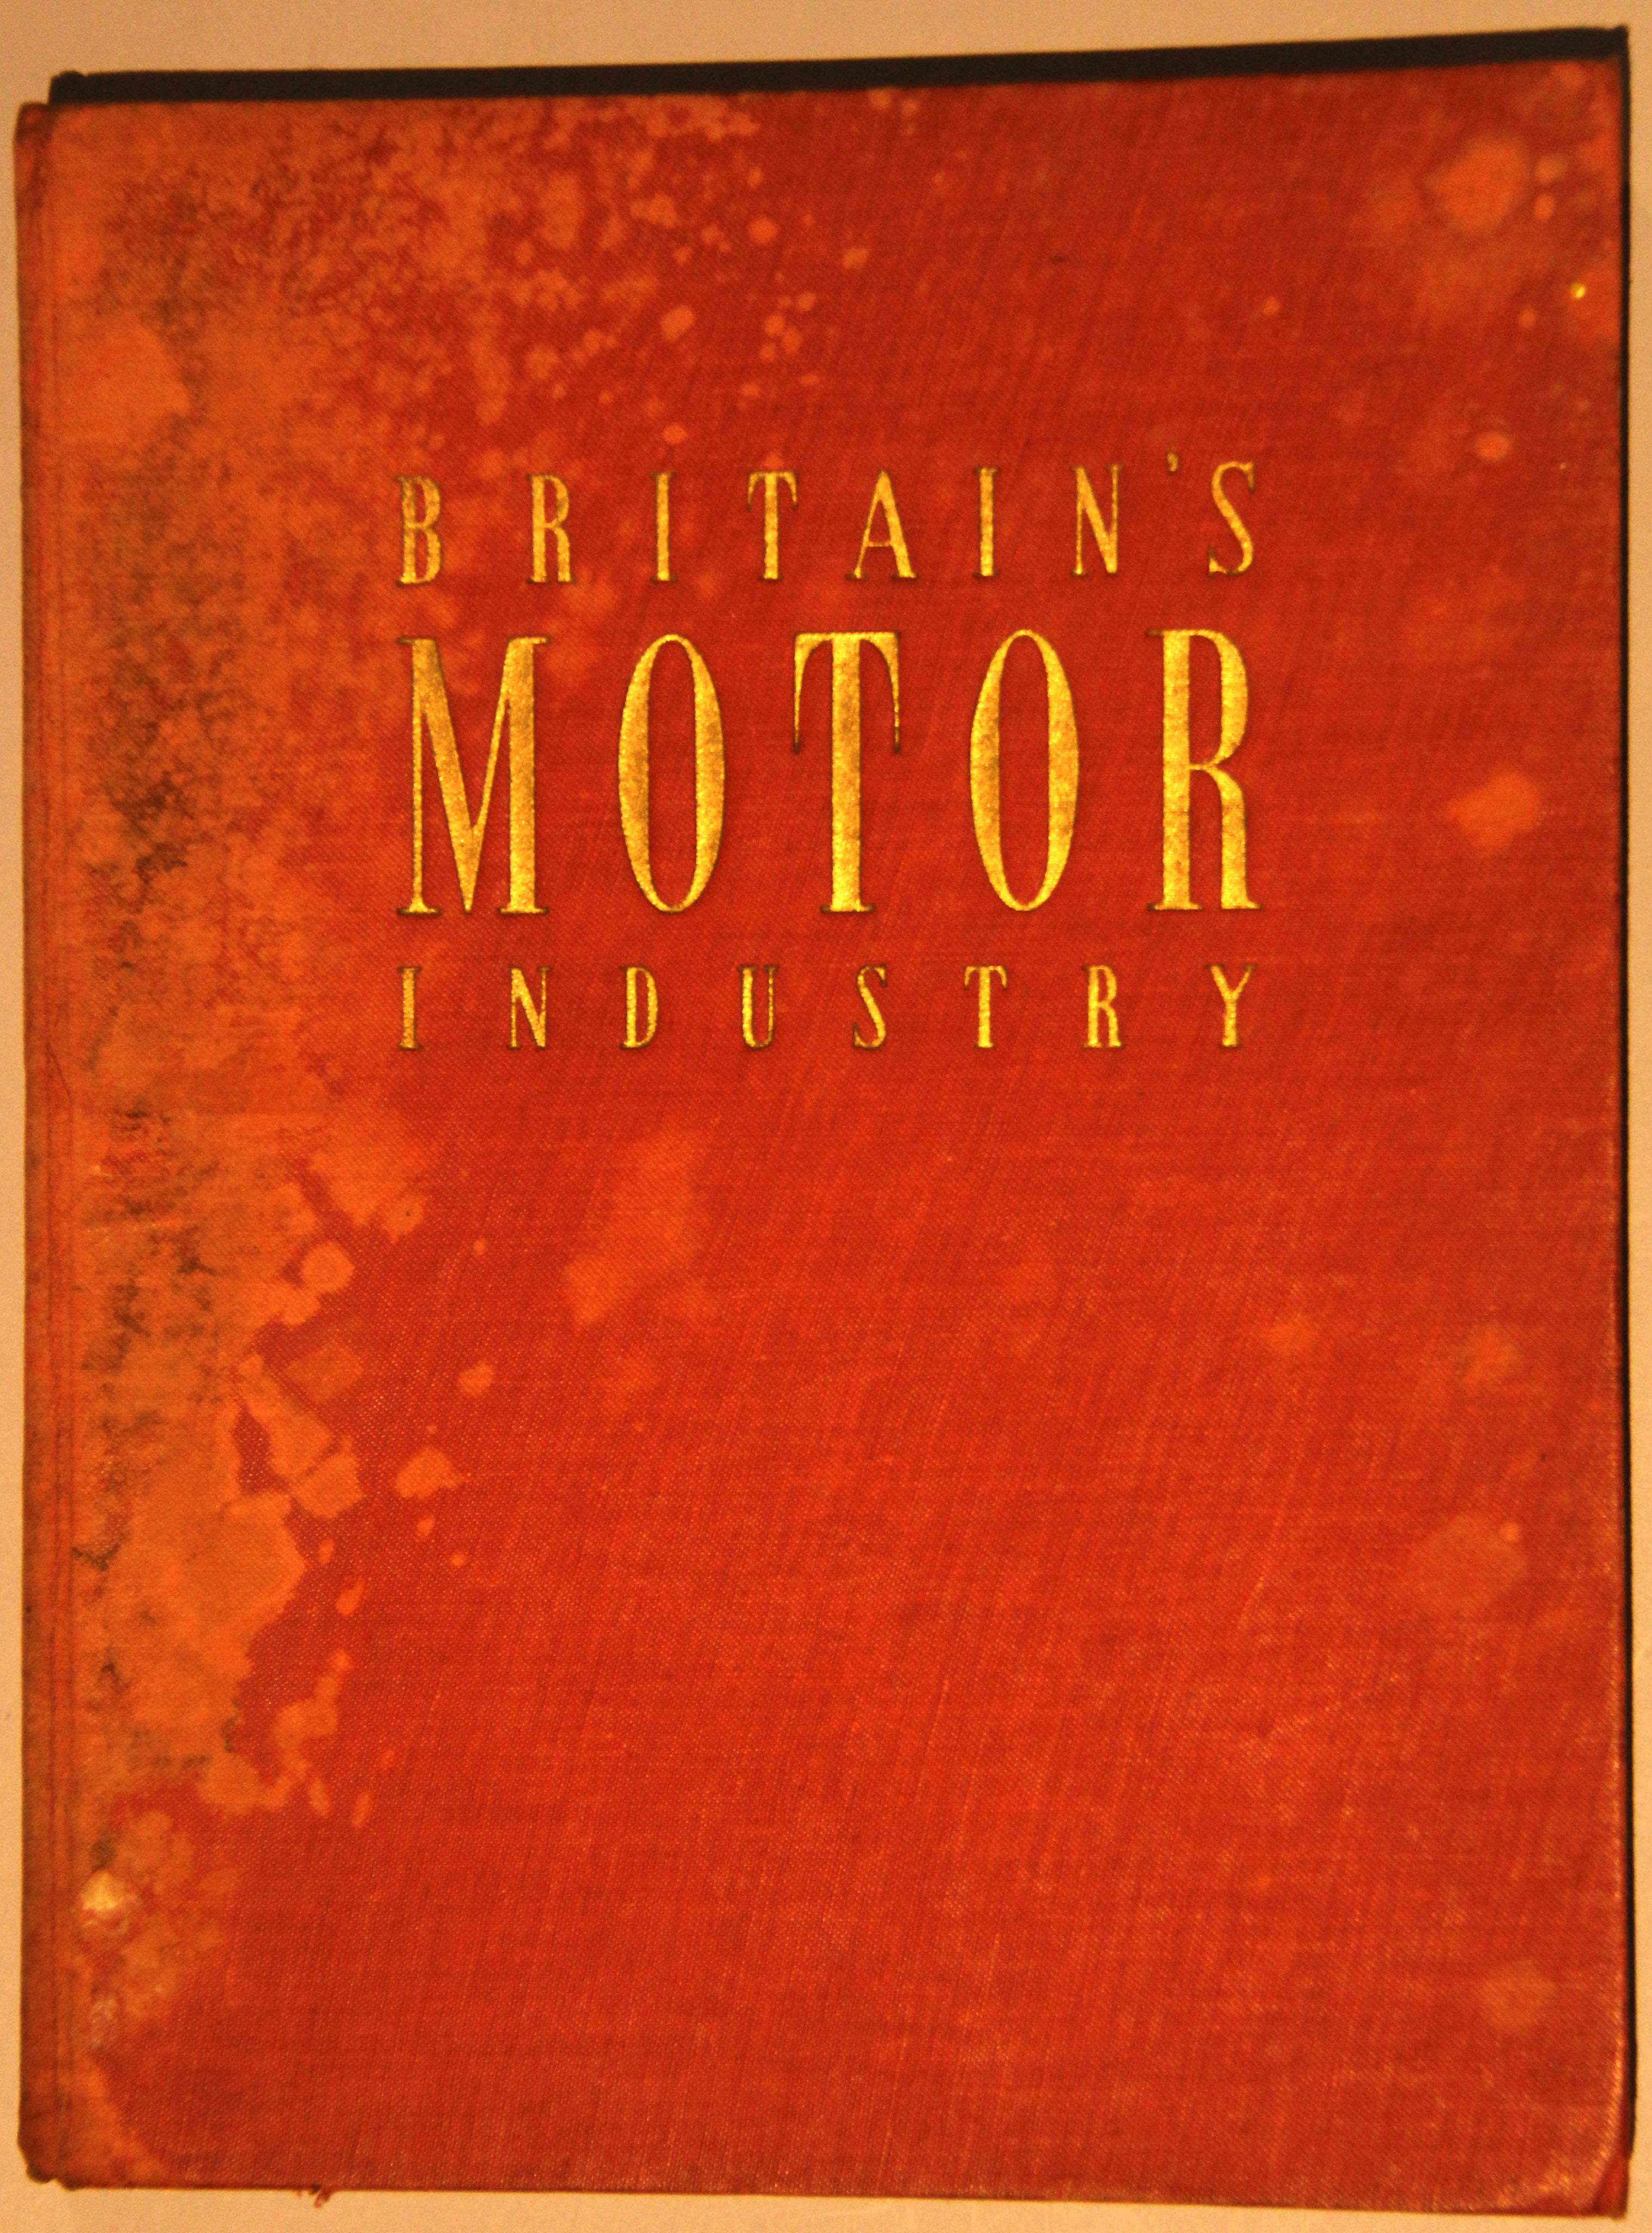 Britain’s Motor Industry by H. G. - Image 9 of 10